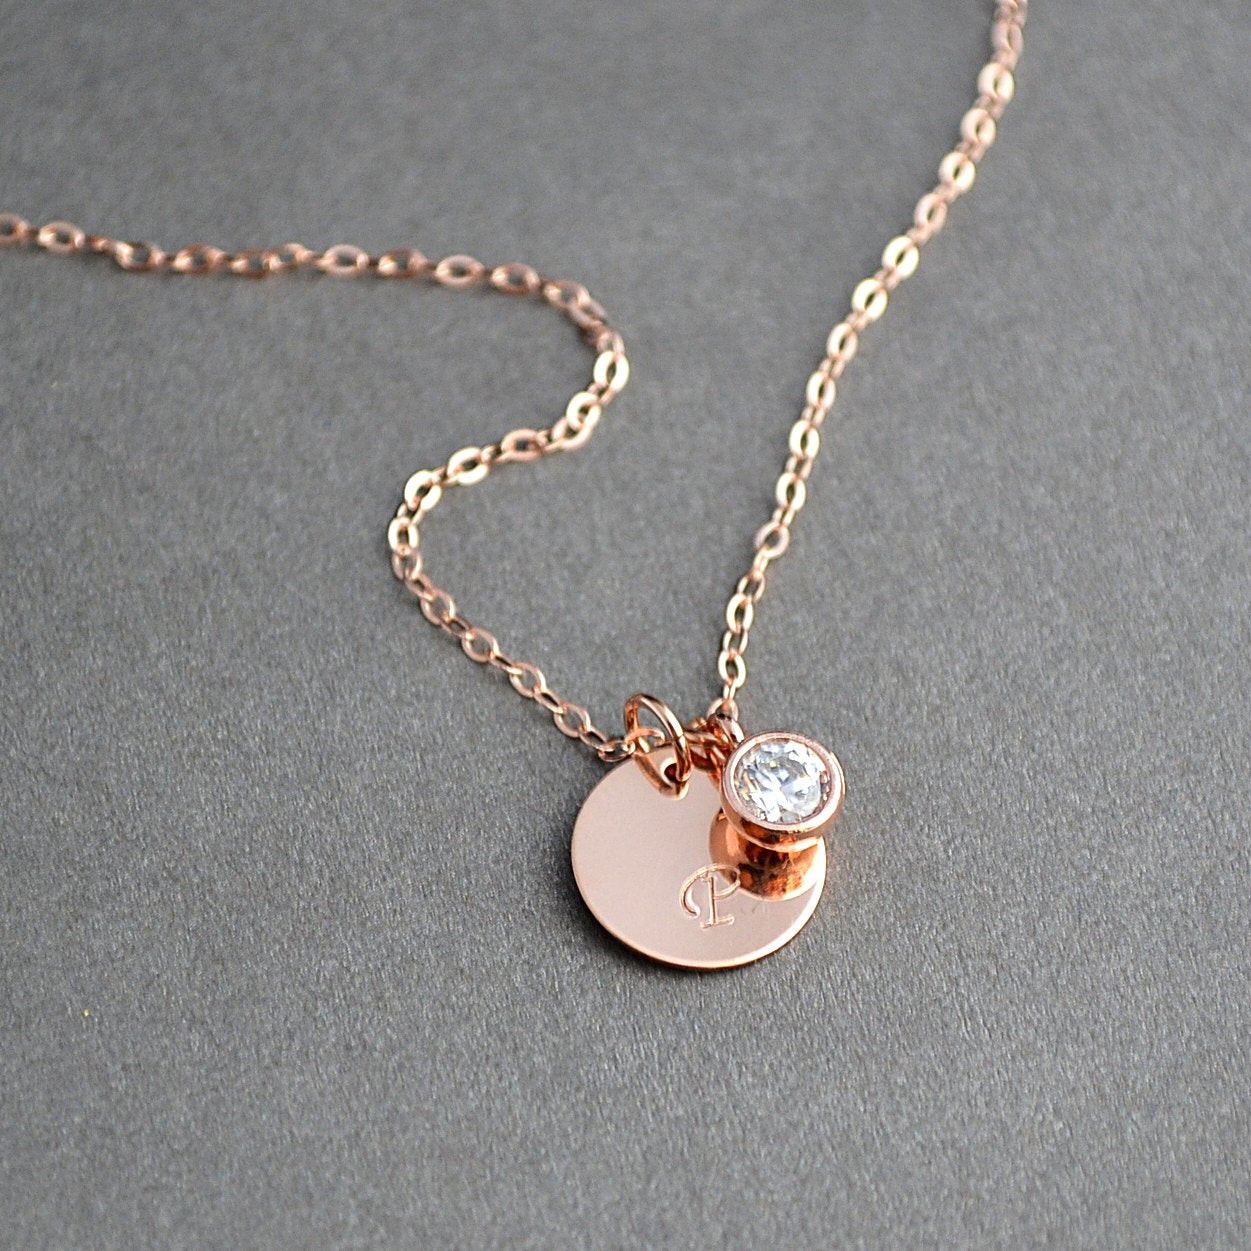 Rose Gold Monogram Necklace
 Rose Gold Initial Necklace Personalized Necklace Bridesmaid